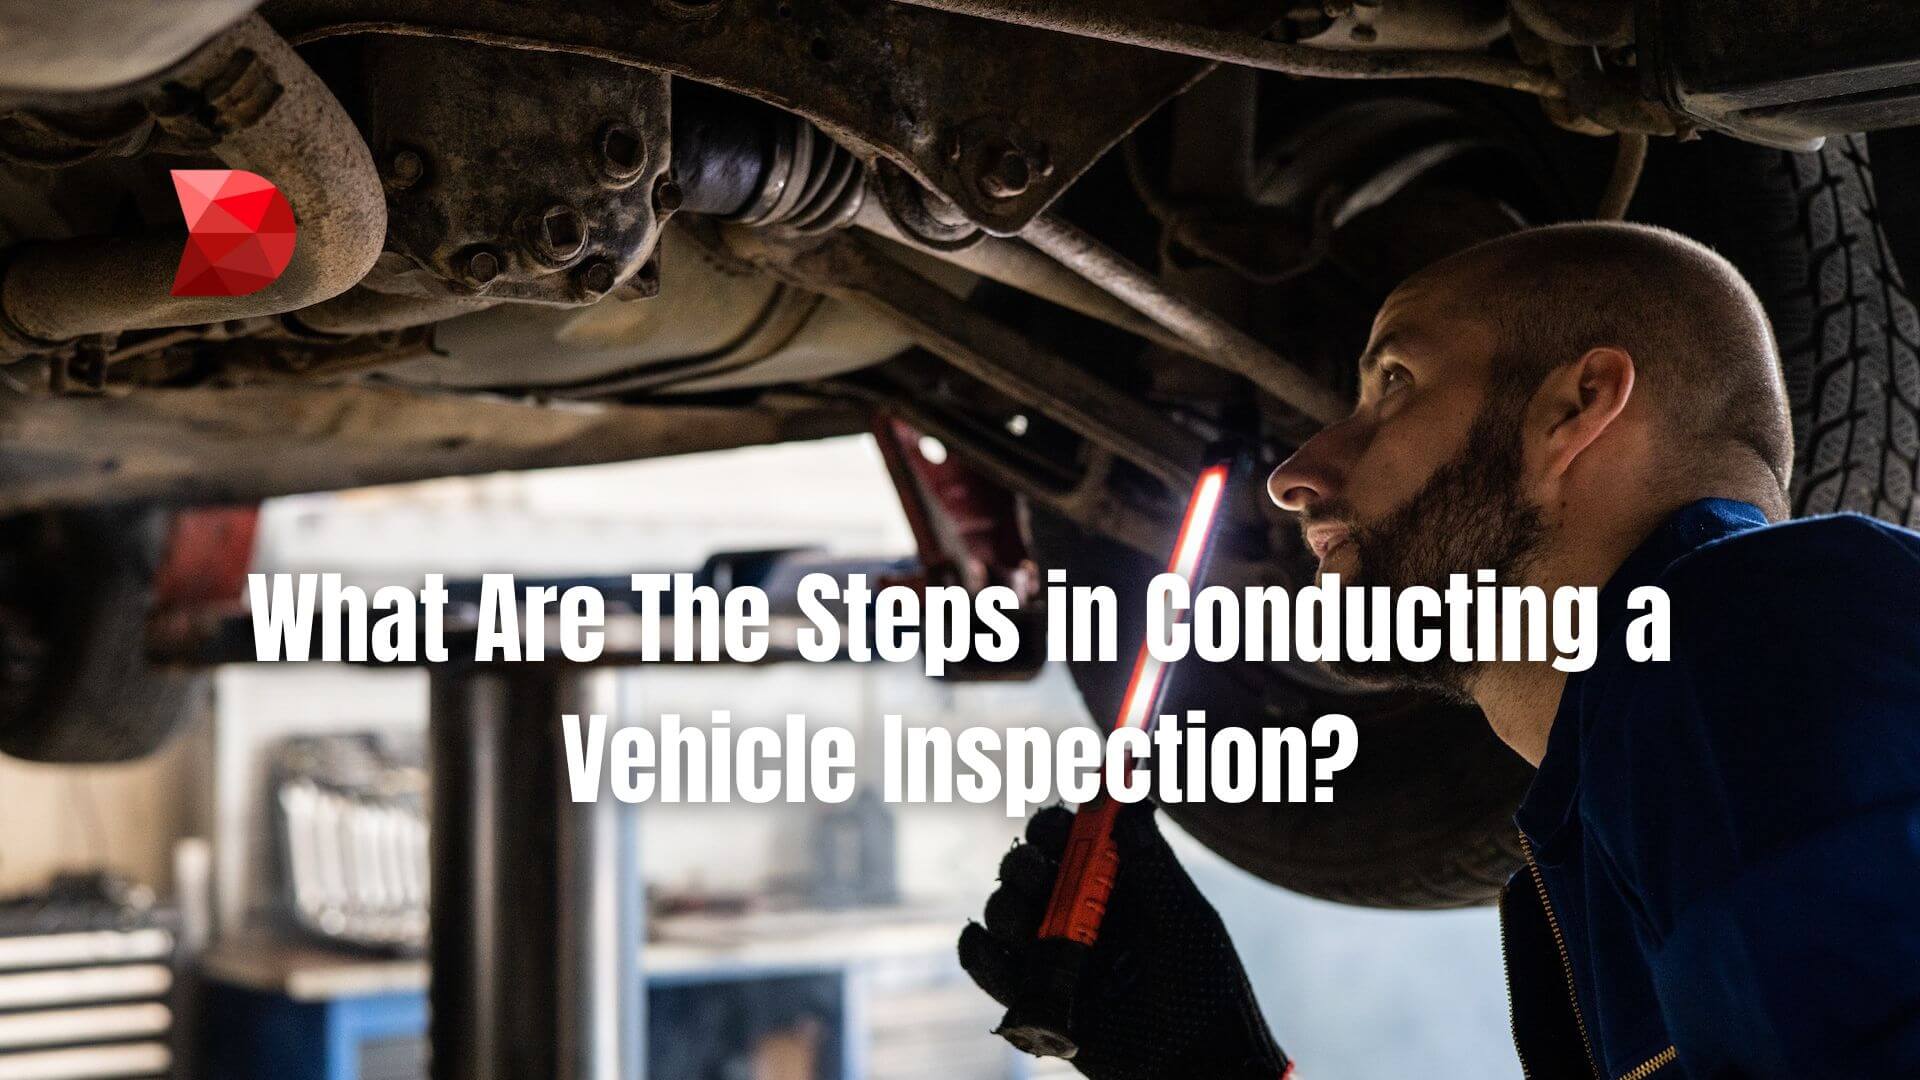 Conducting Vehicle Inspection 